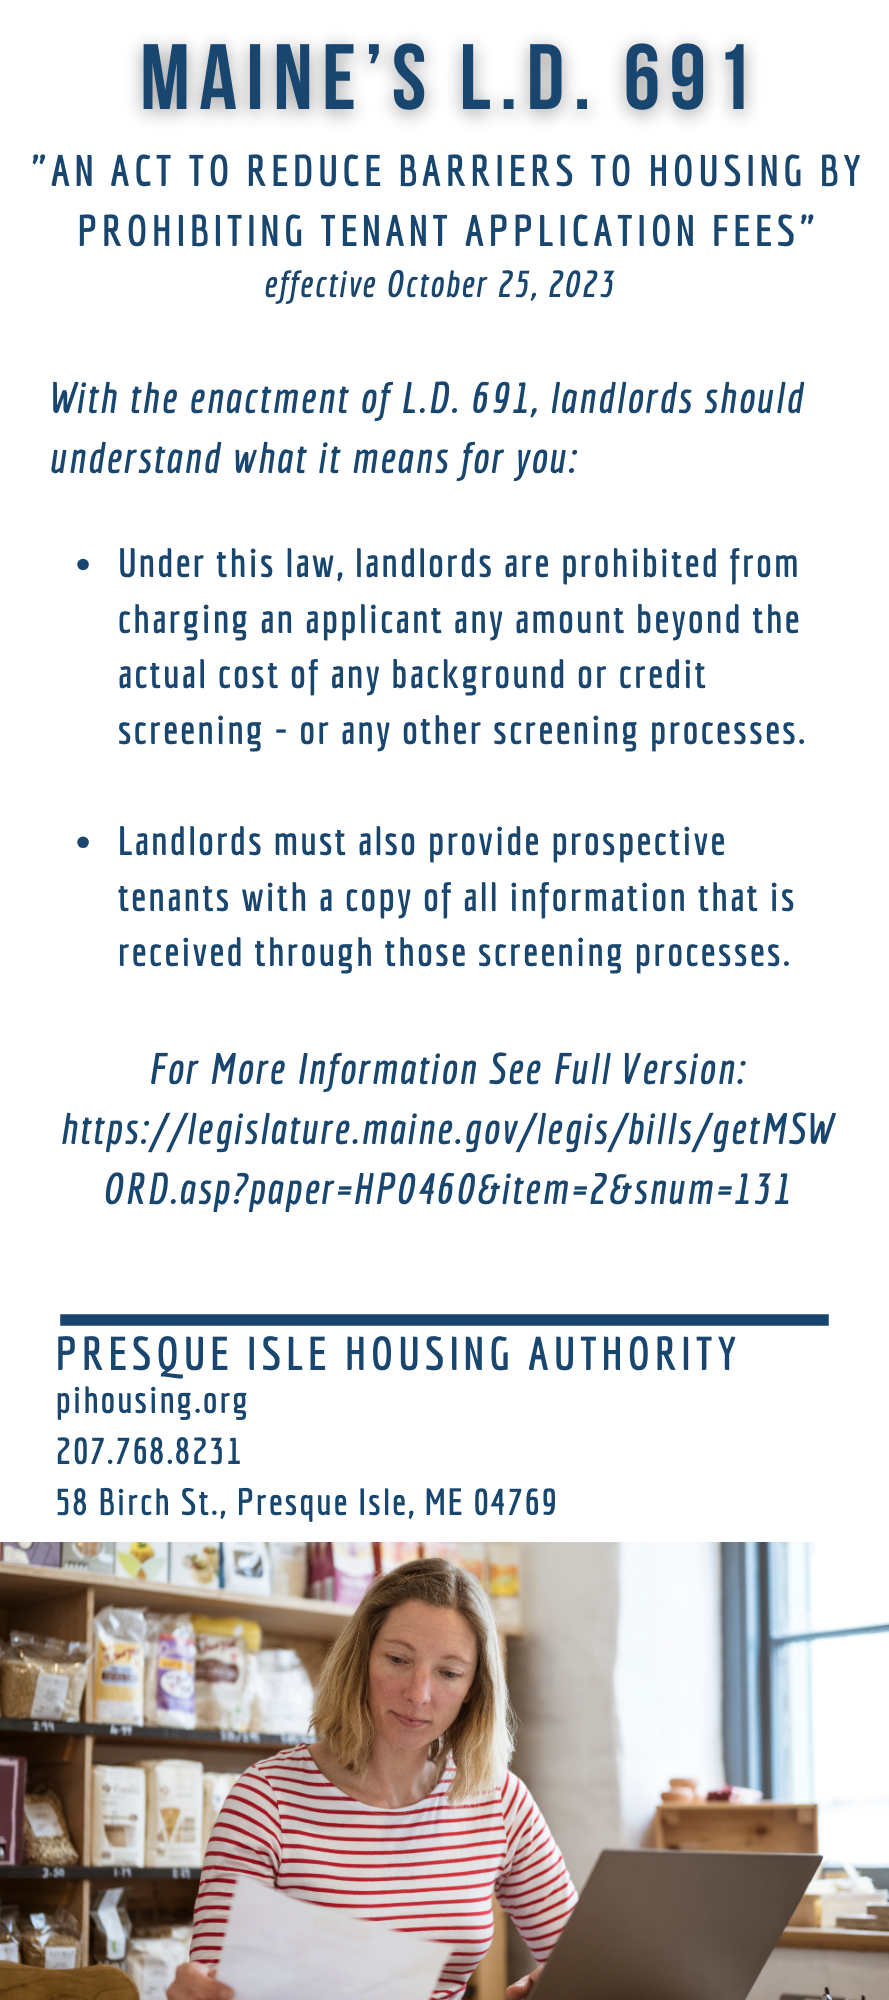 Maine's L.D. 691 An act to reduce barriers to housing by prohibiting tenant application fees effective October 25, 2023